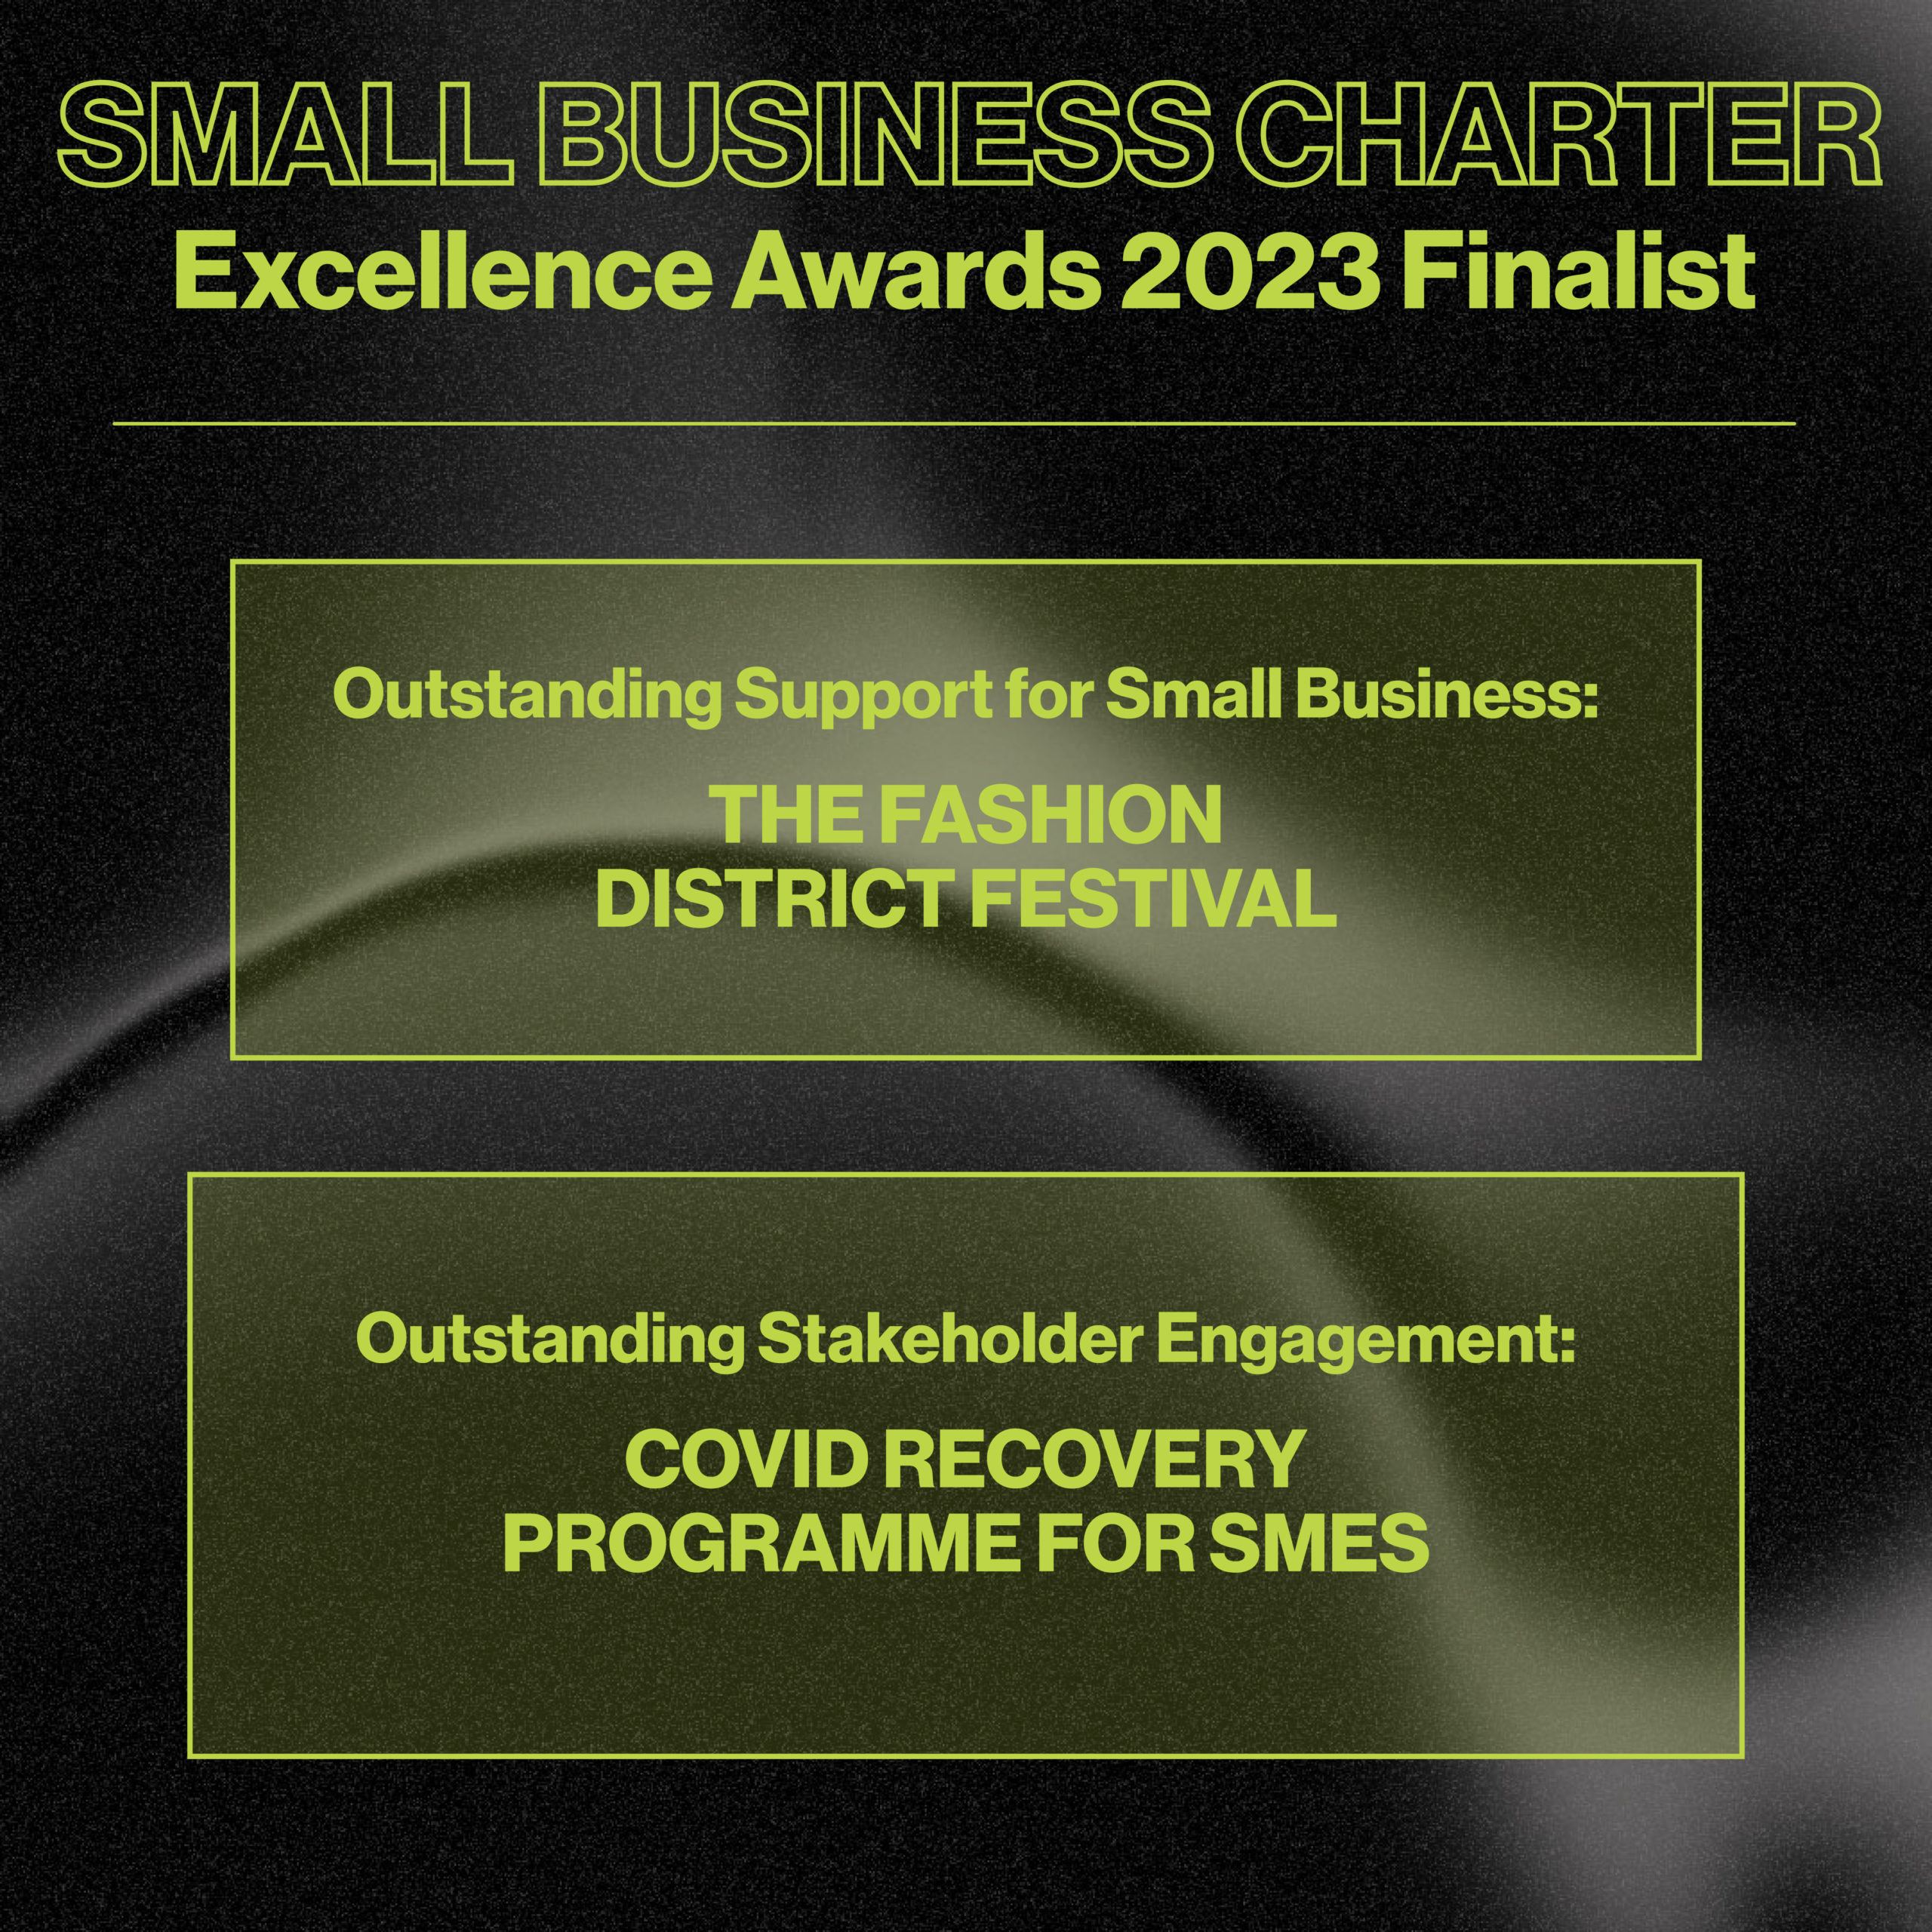 Fashion District Shortlisted for Small Business Charter Excellence Awards